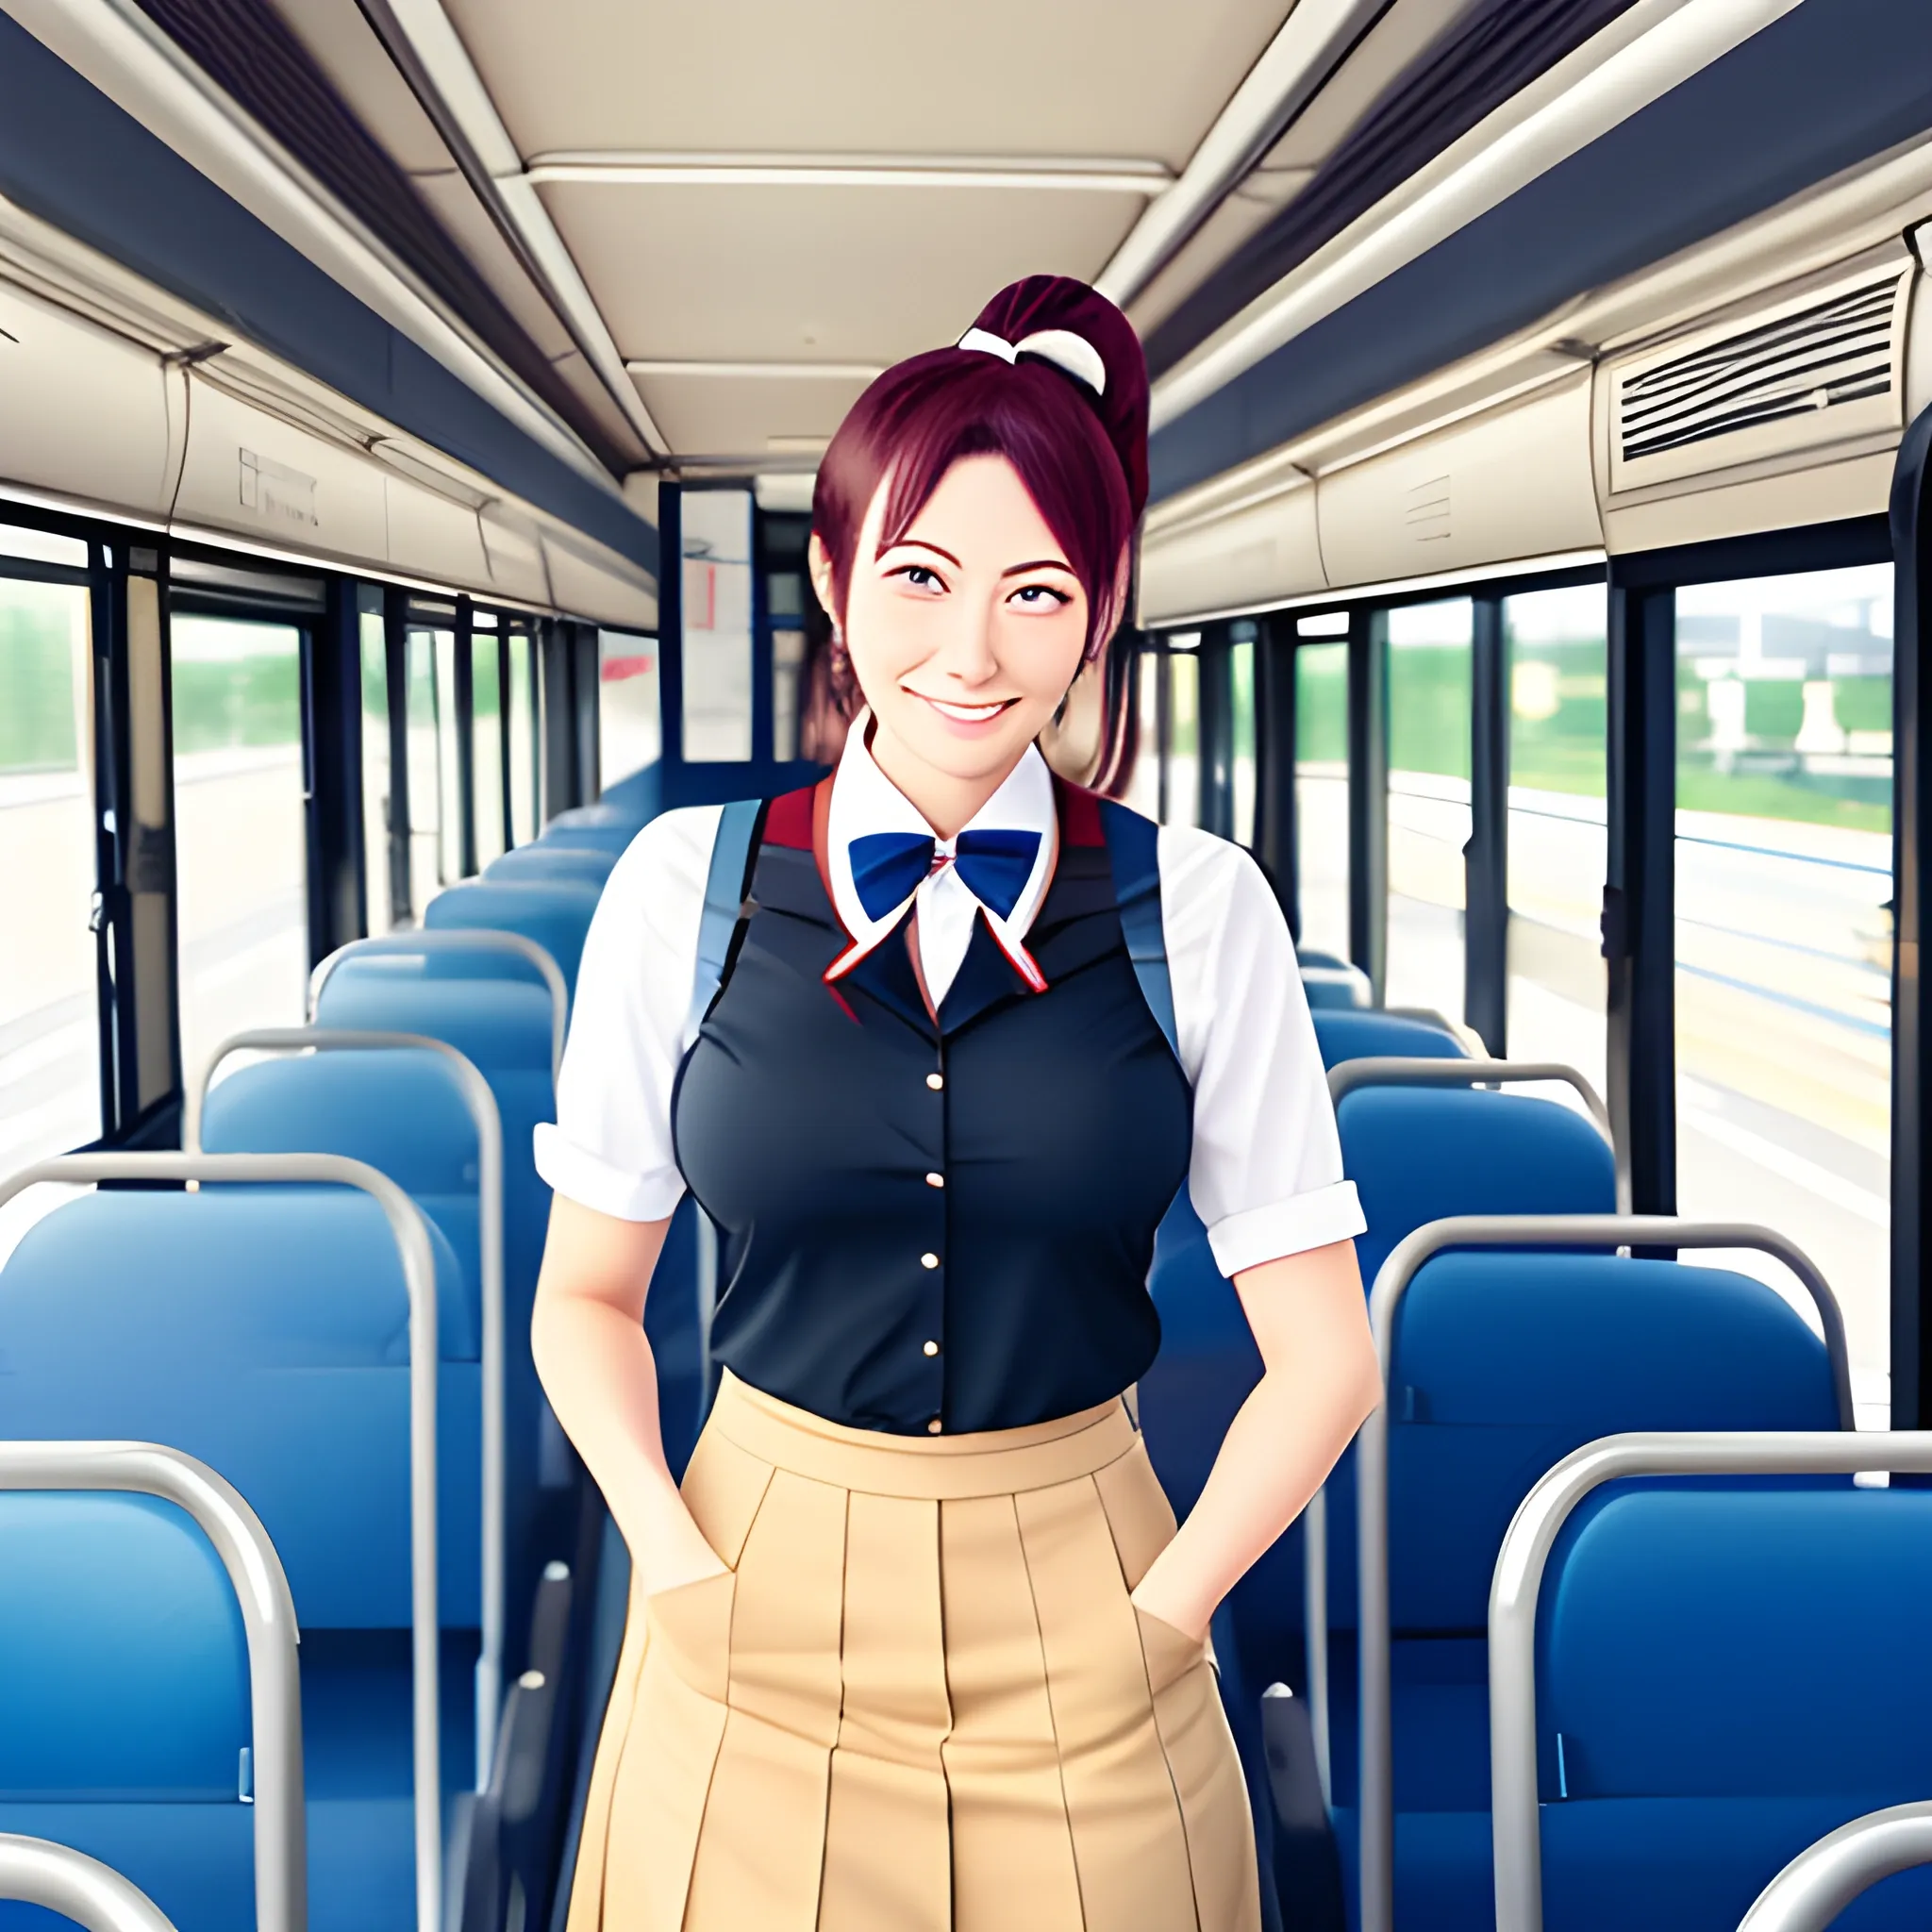 With her school uniform neatly pressed and her hair tied up in a bow, an anime school girl eagerly boards a bus, ready to explore the world beyond her classroom.